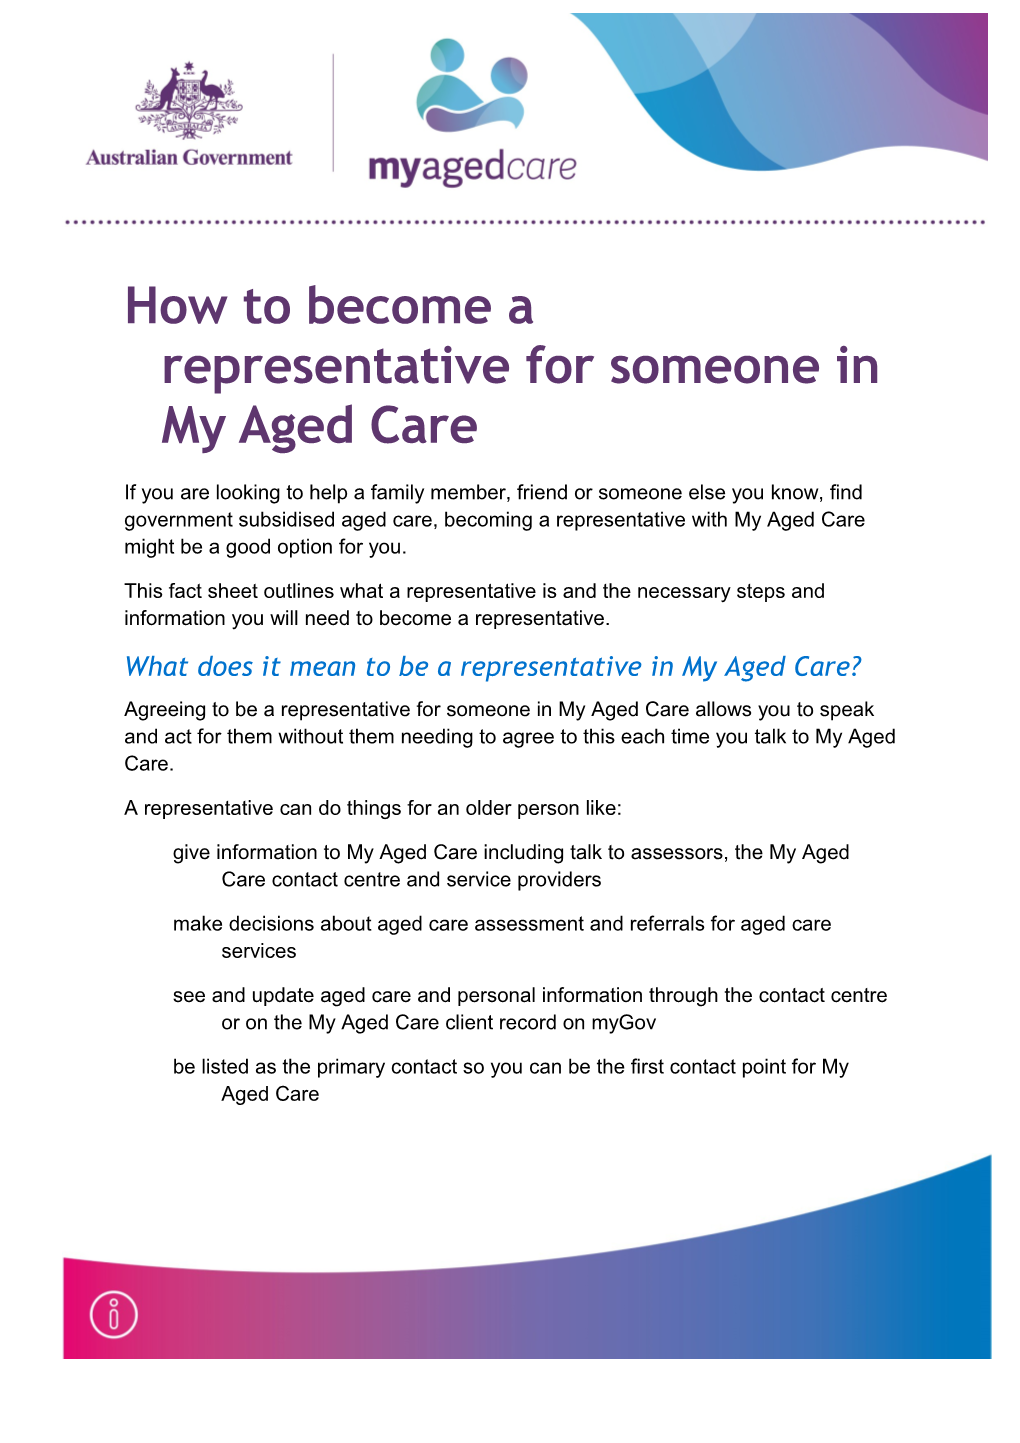 How to Become a Representative for Someone in My Aged Care